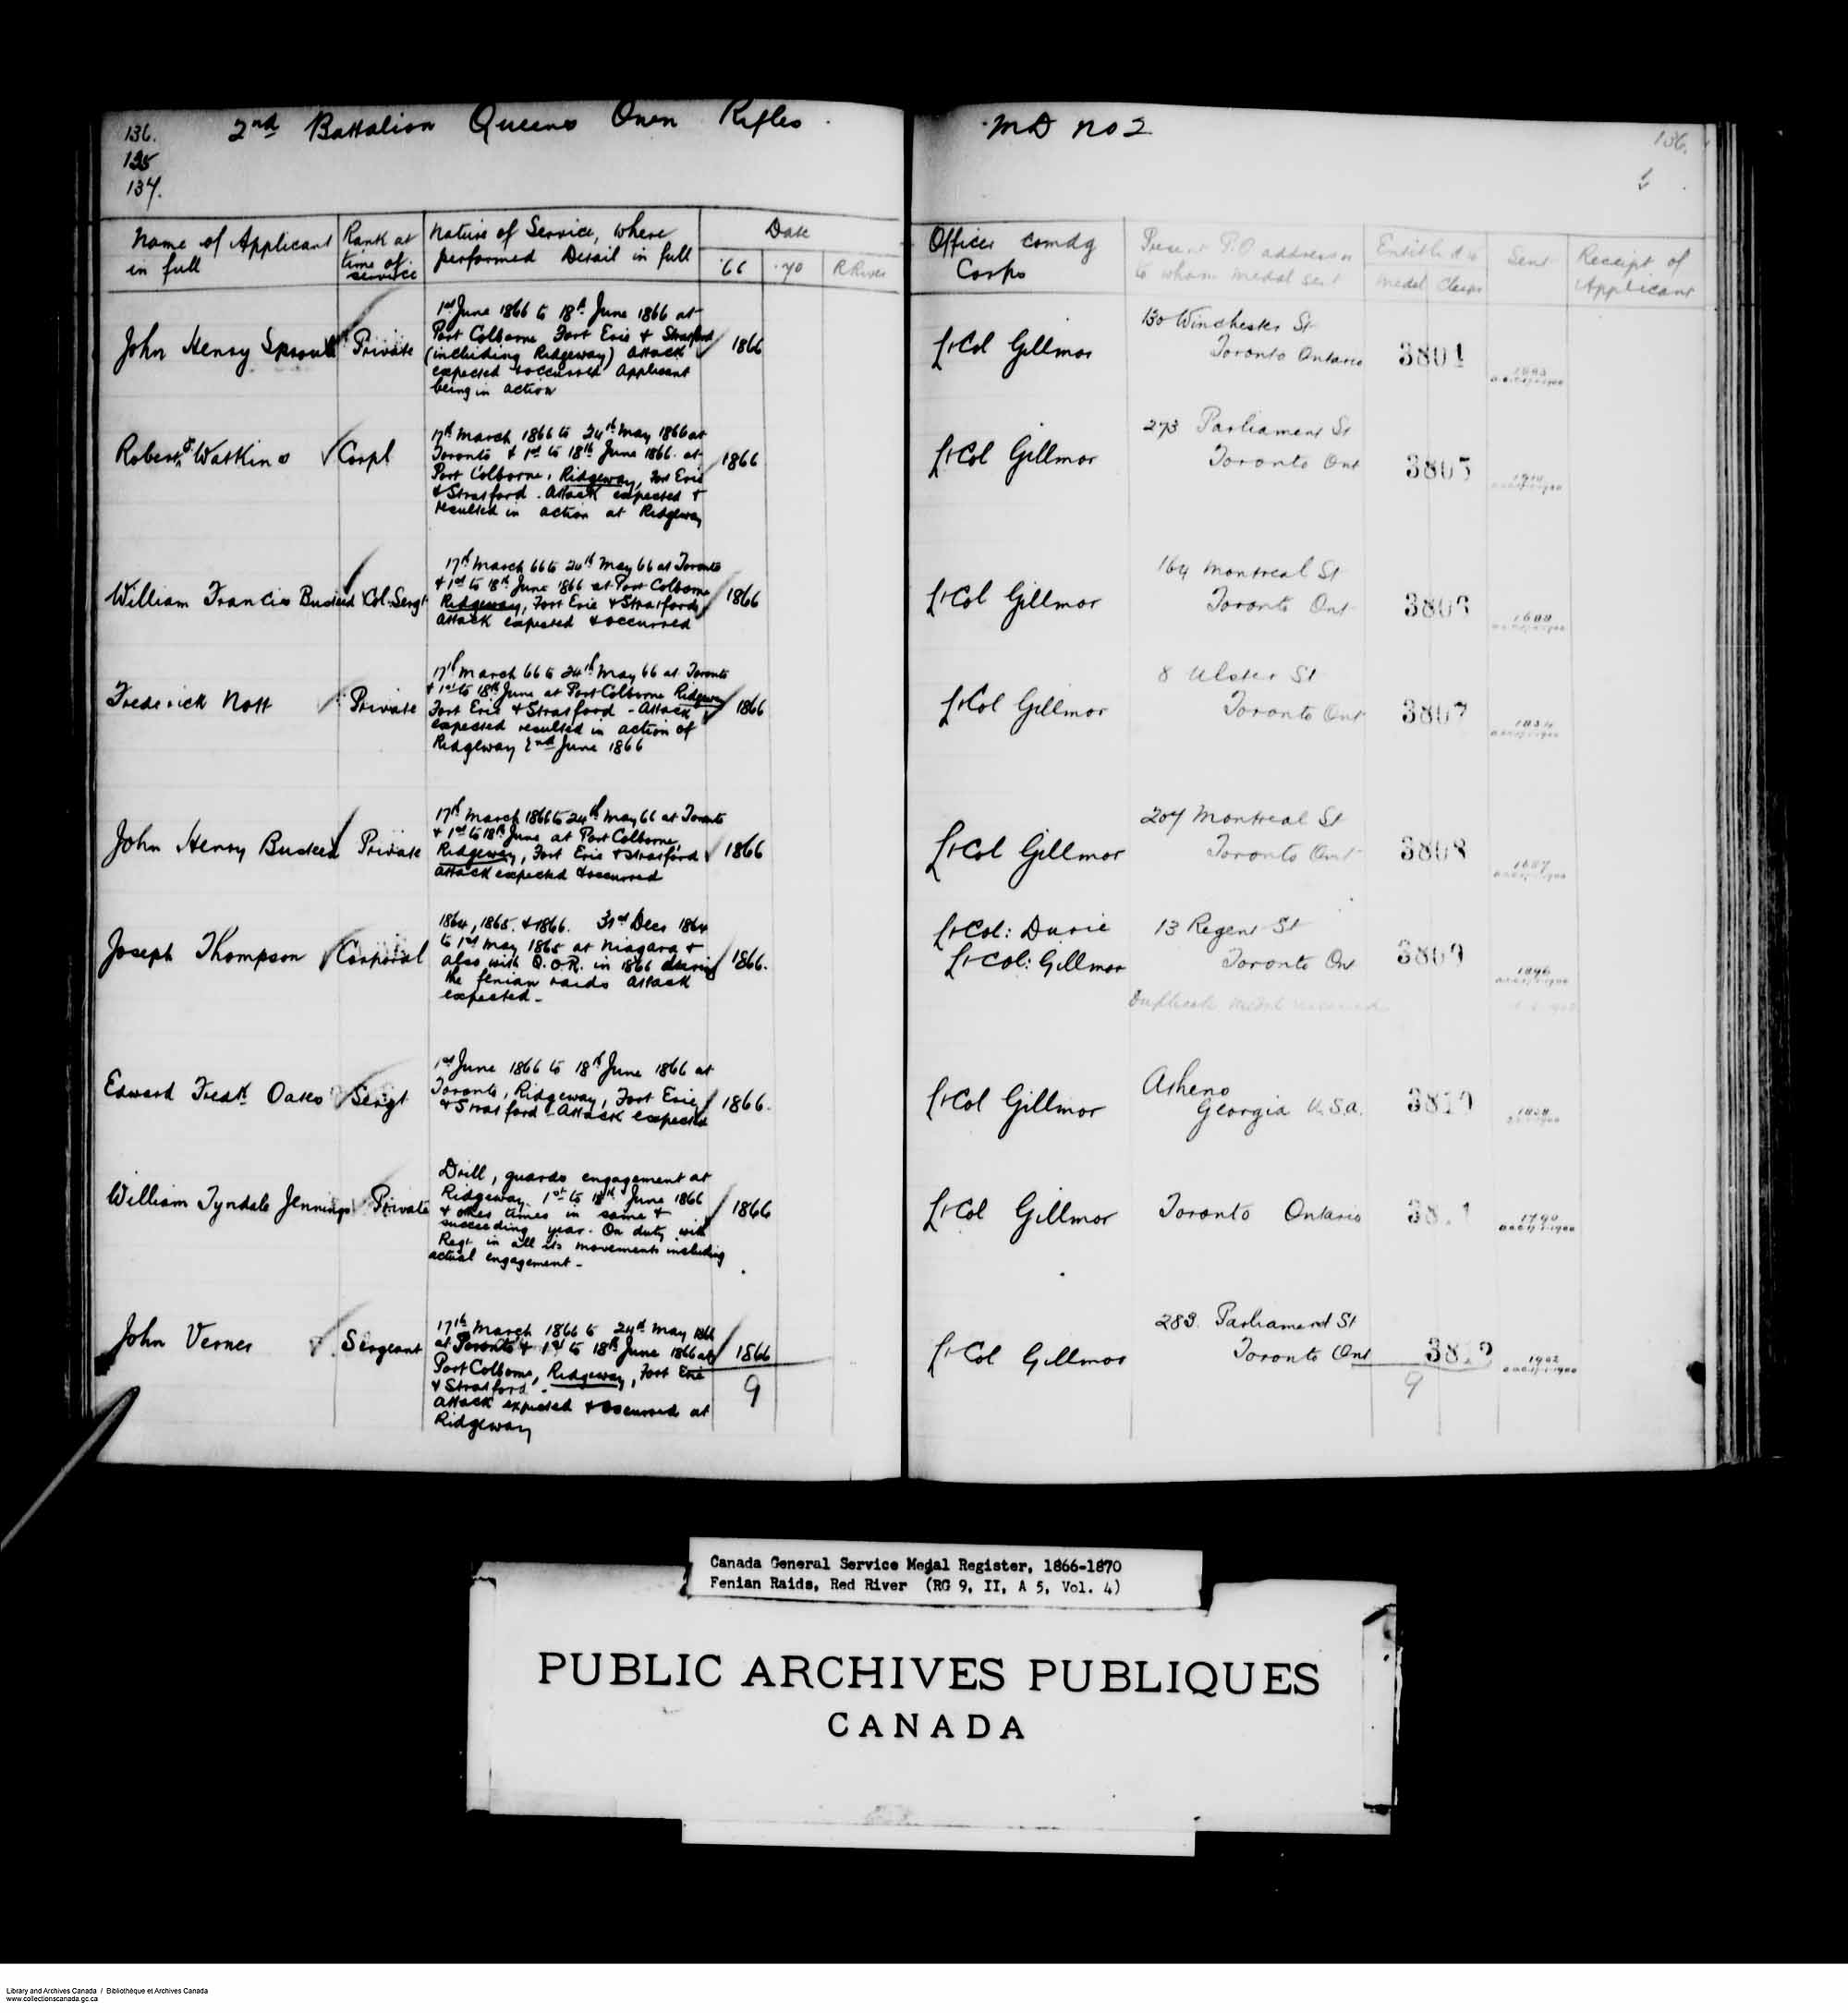 Digitized page of Medals, Honours and Awards for Image No.: e008681823